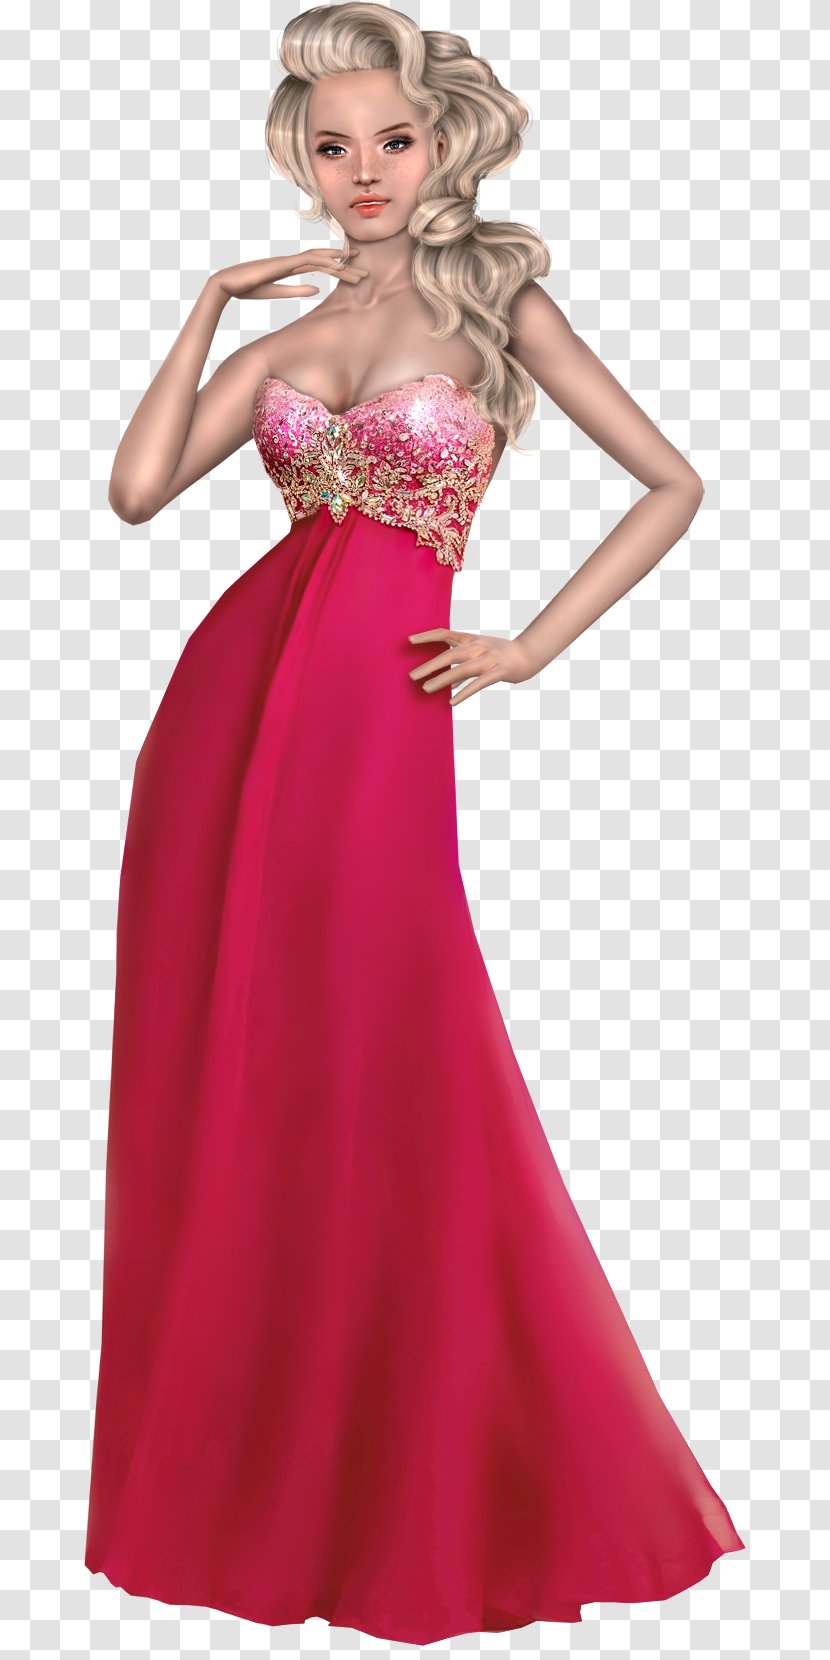 Gown Cocktail Dress Satin - Silhouette Transparent PNG